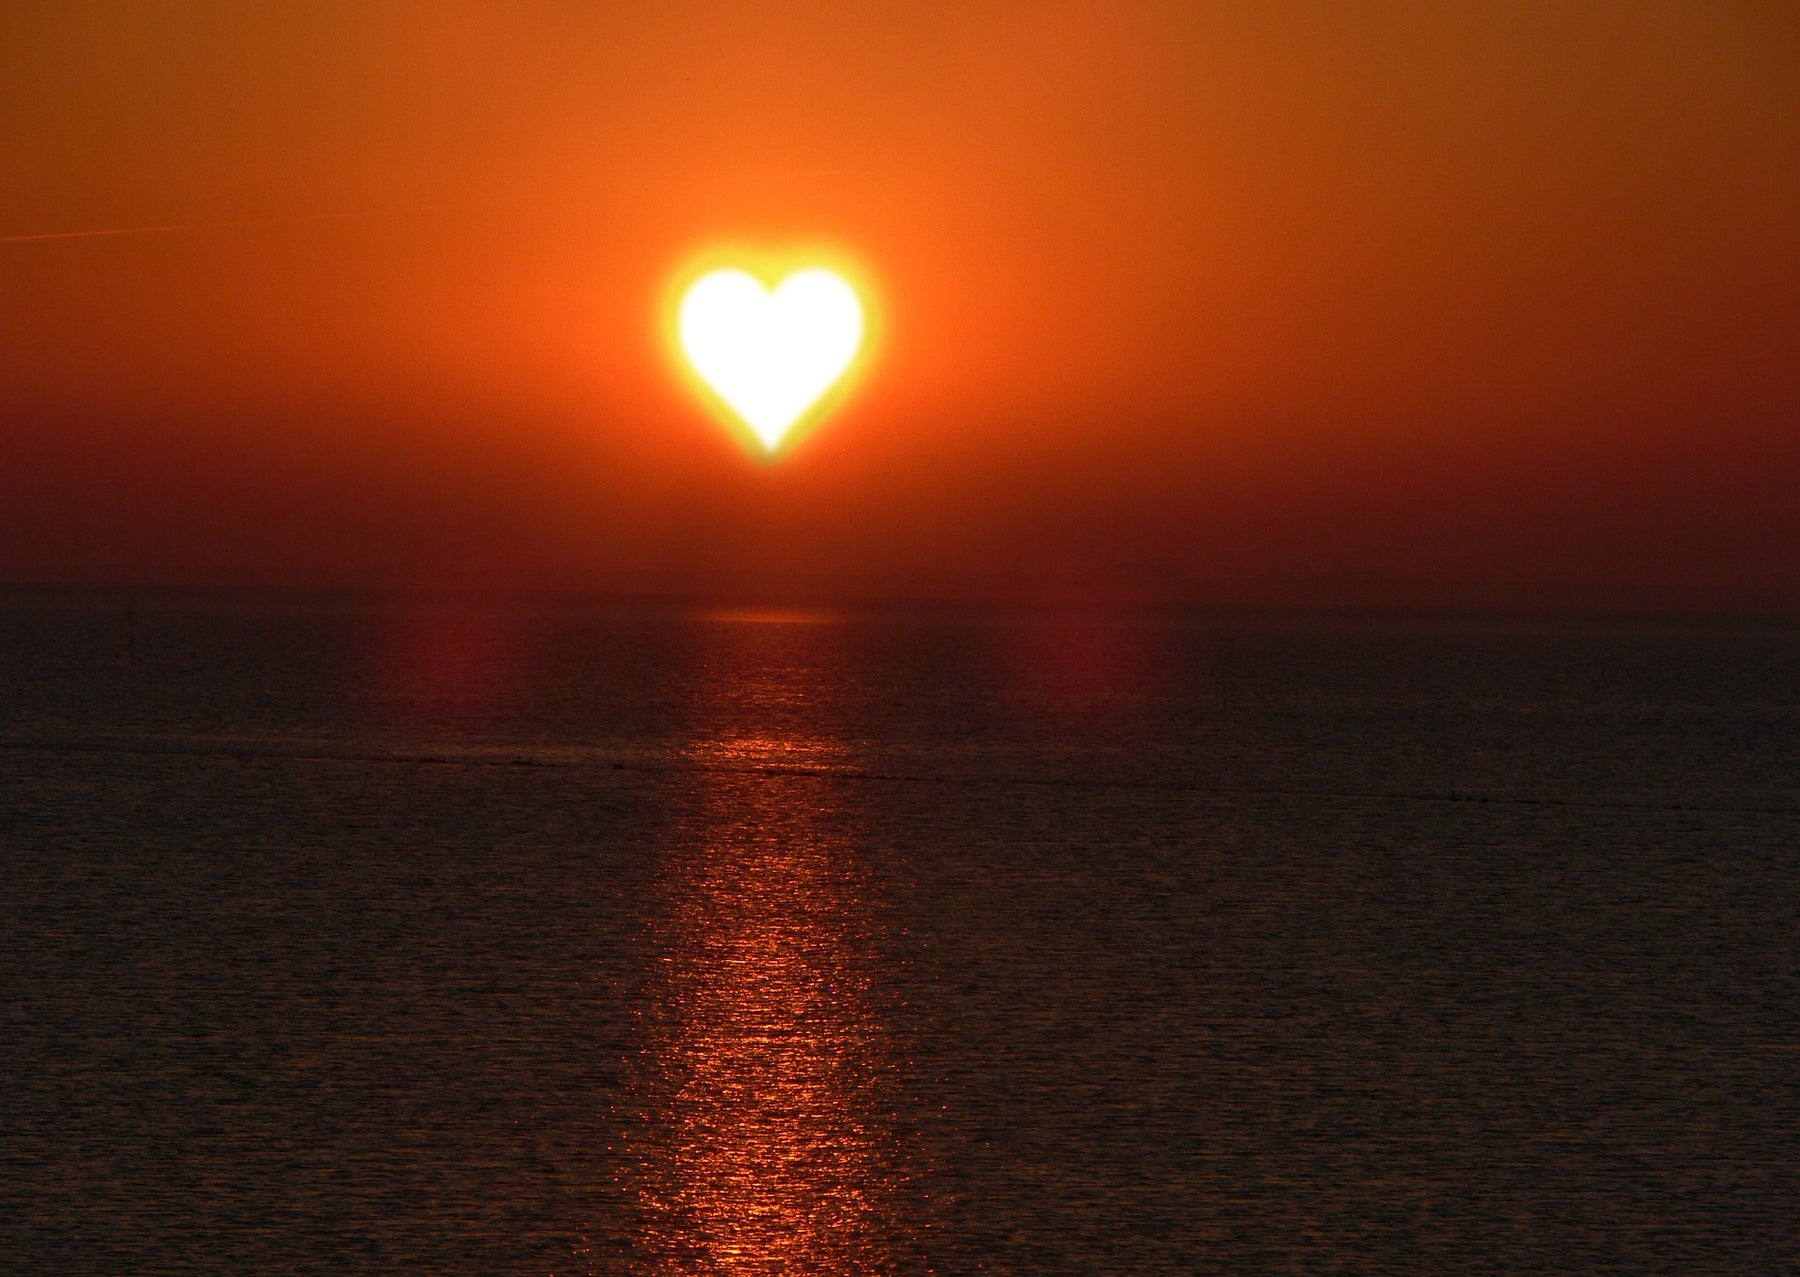 Beautiful ocean sunset with the sun shaped like a heart